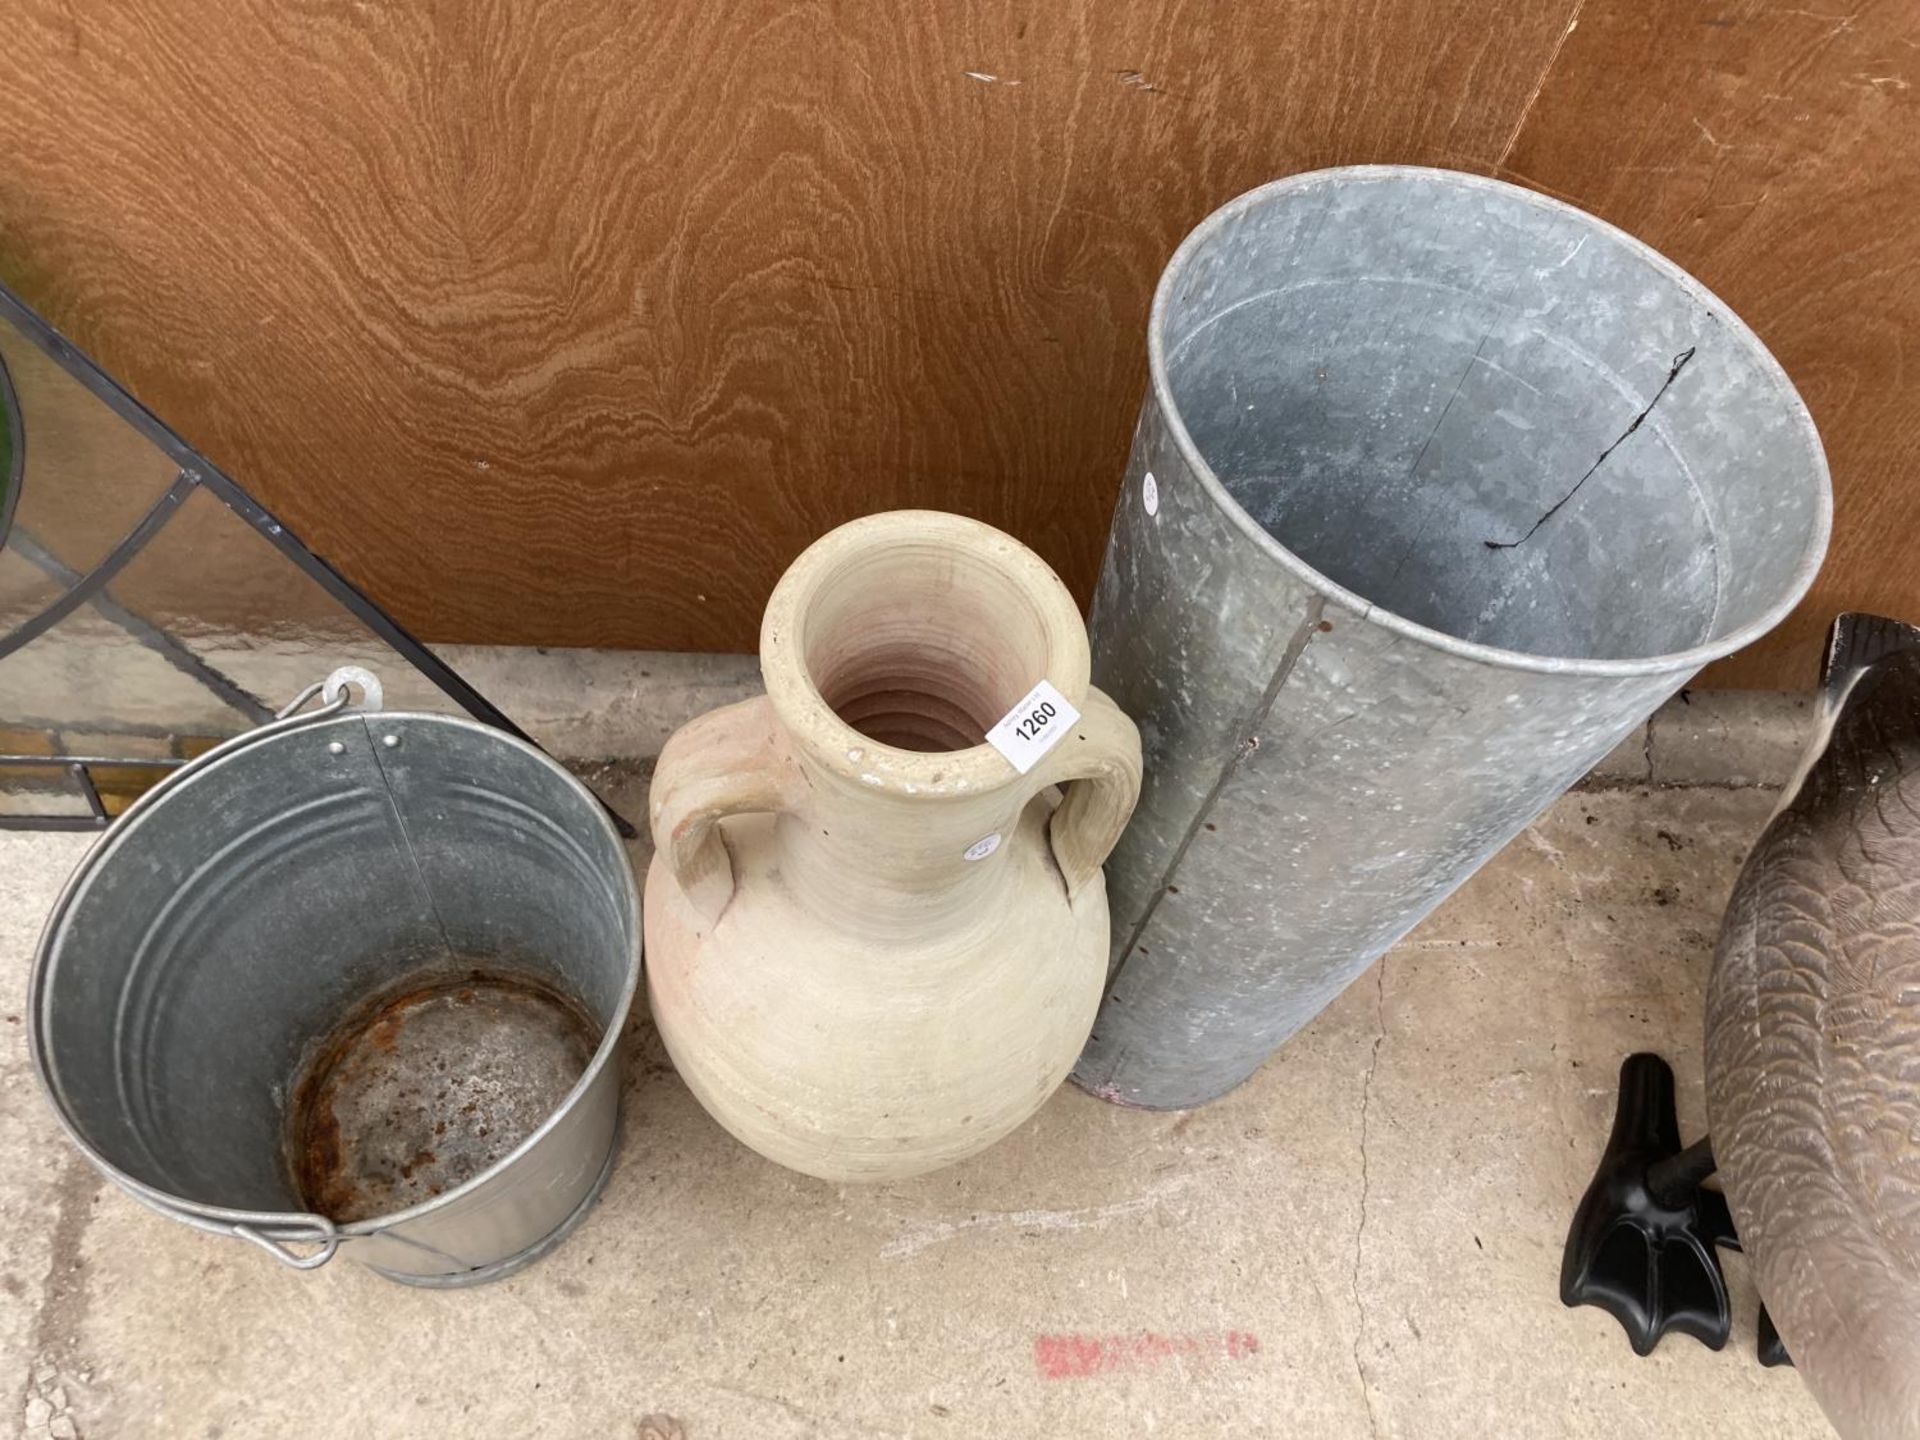 TWO GALAVANISED BUCKETS AND A CERAMIC URN VASE - Image 3 of 10